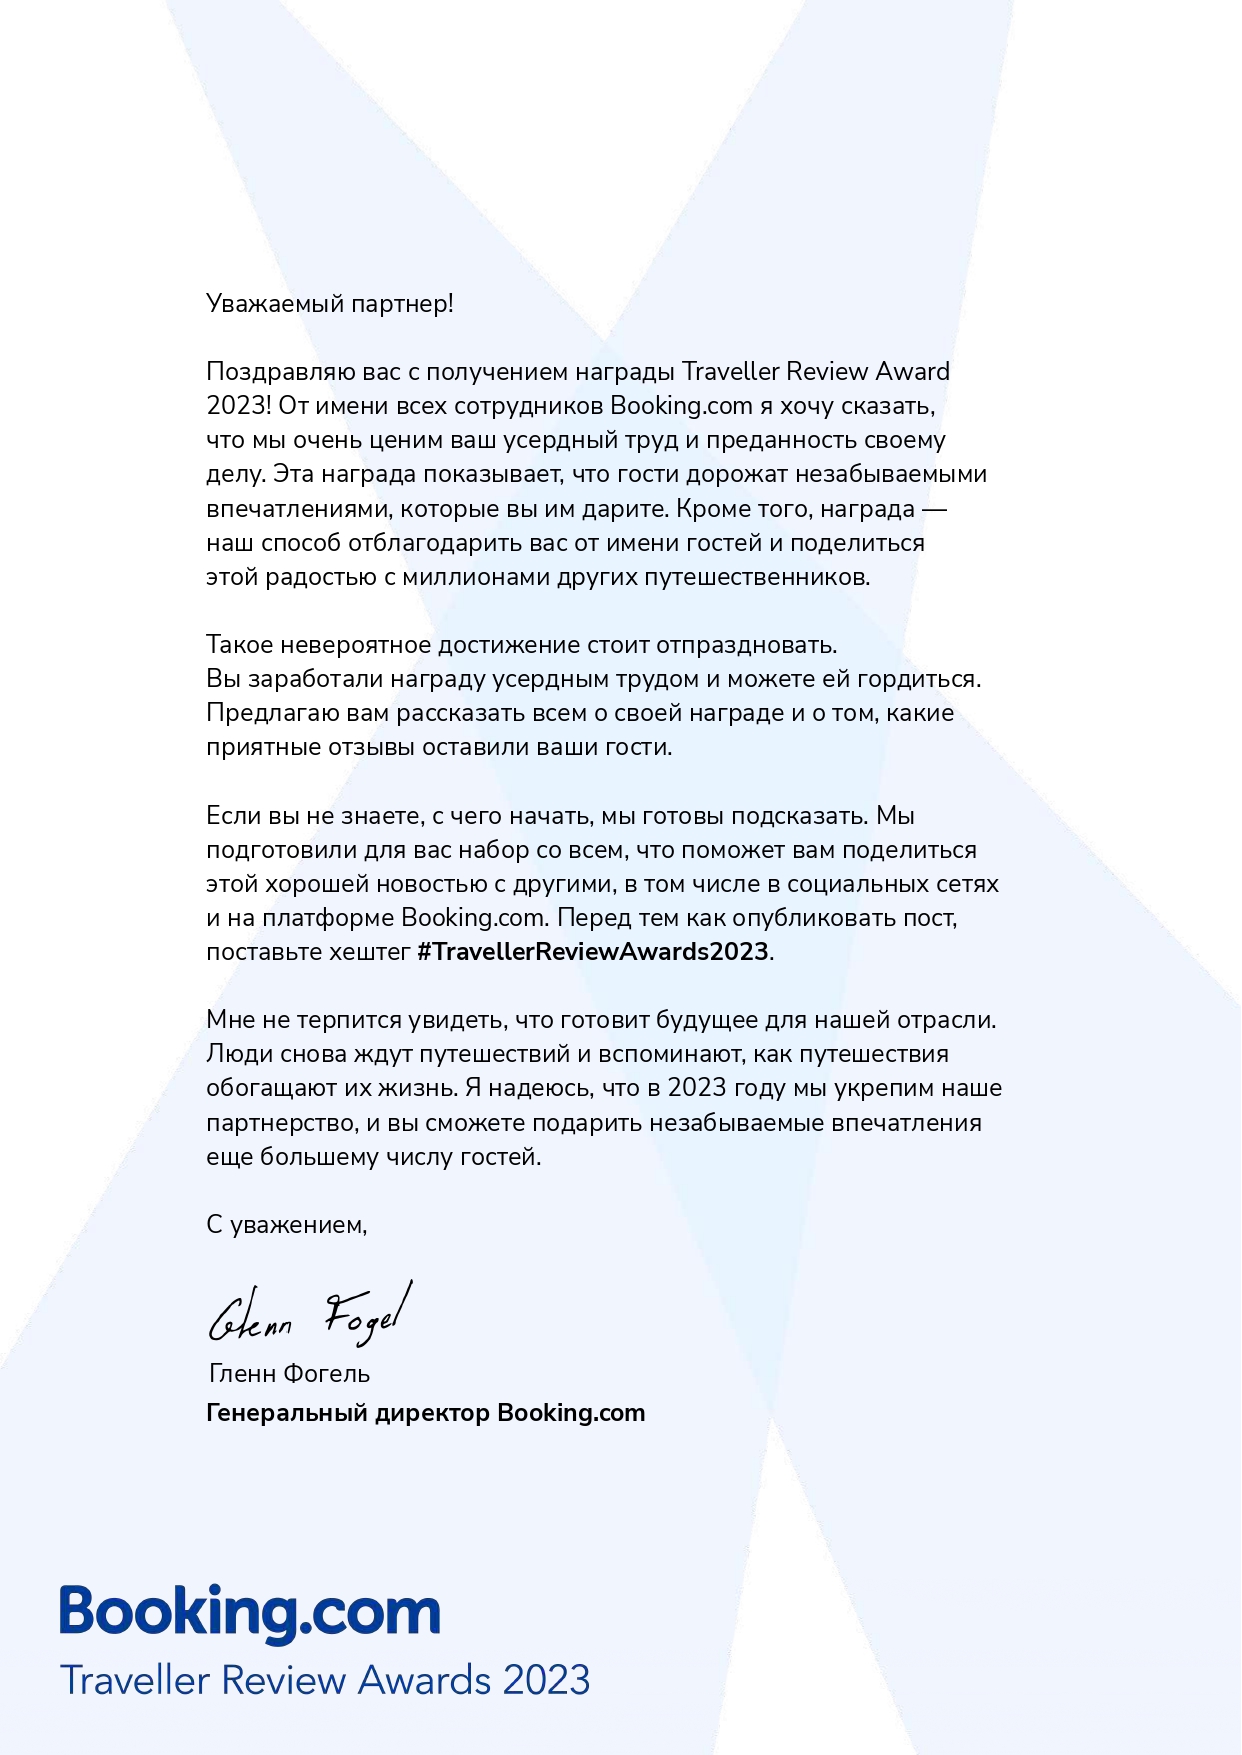 Traveller Review Awards 2023 Booking Letter